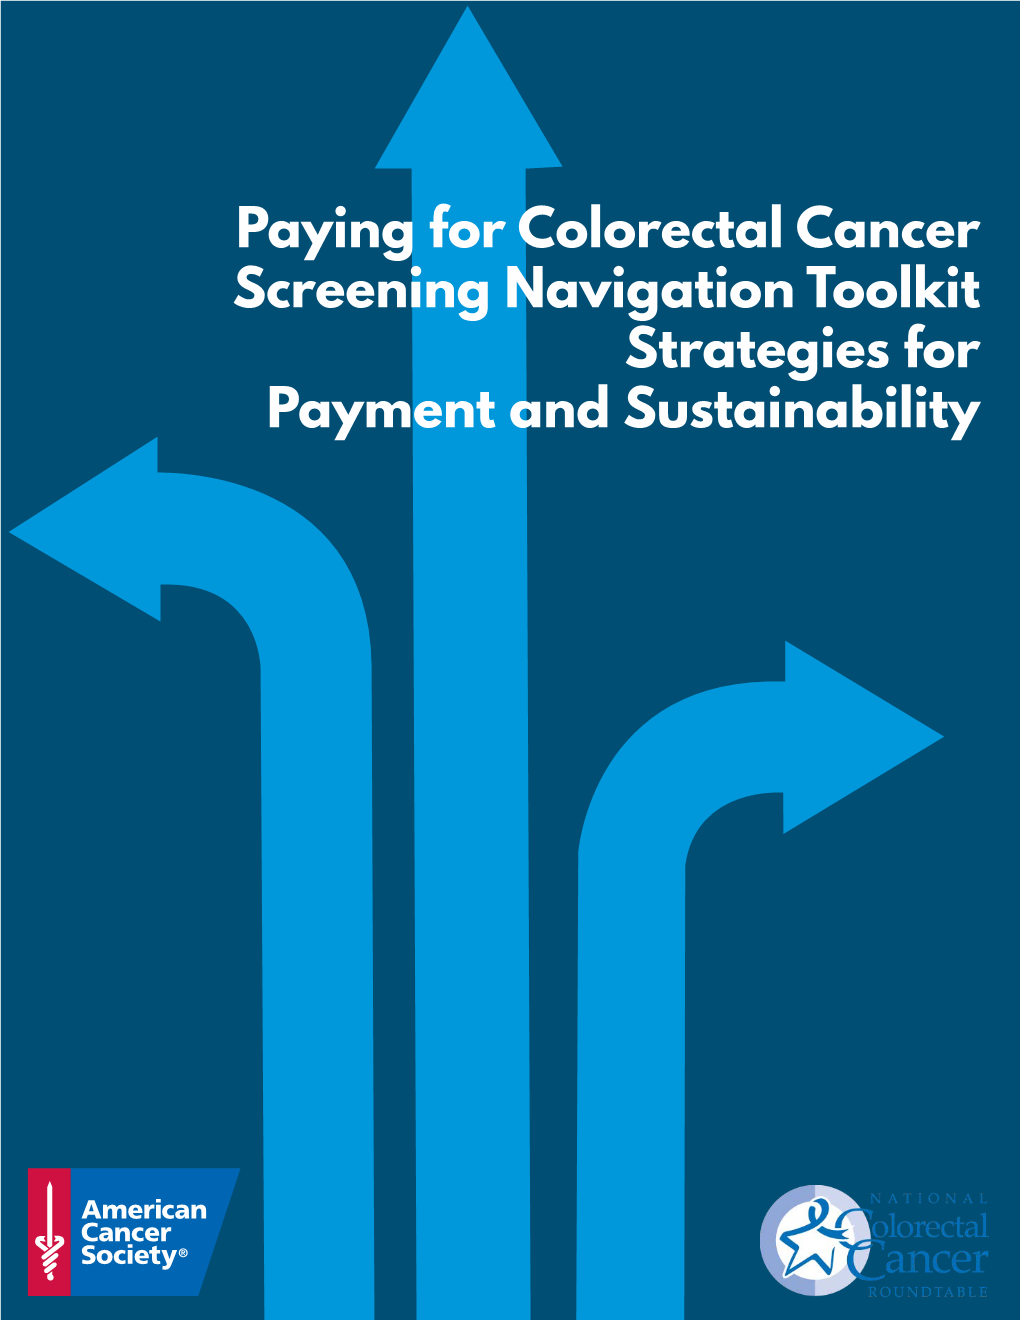 Paying for Colorectal Cancer Screening Patient Navigation Toolkit